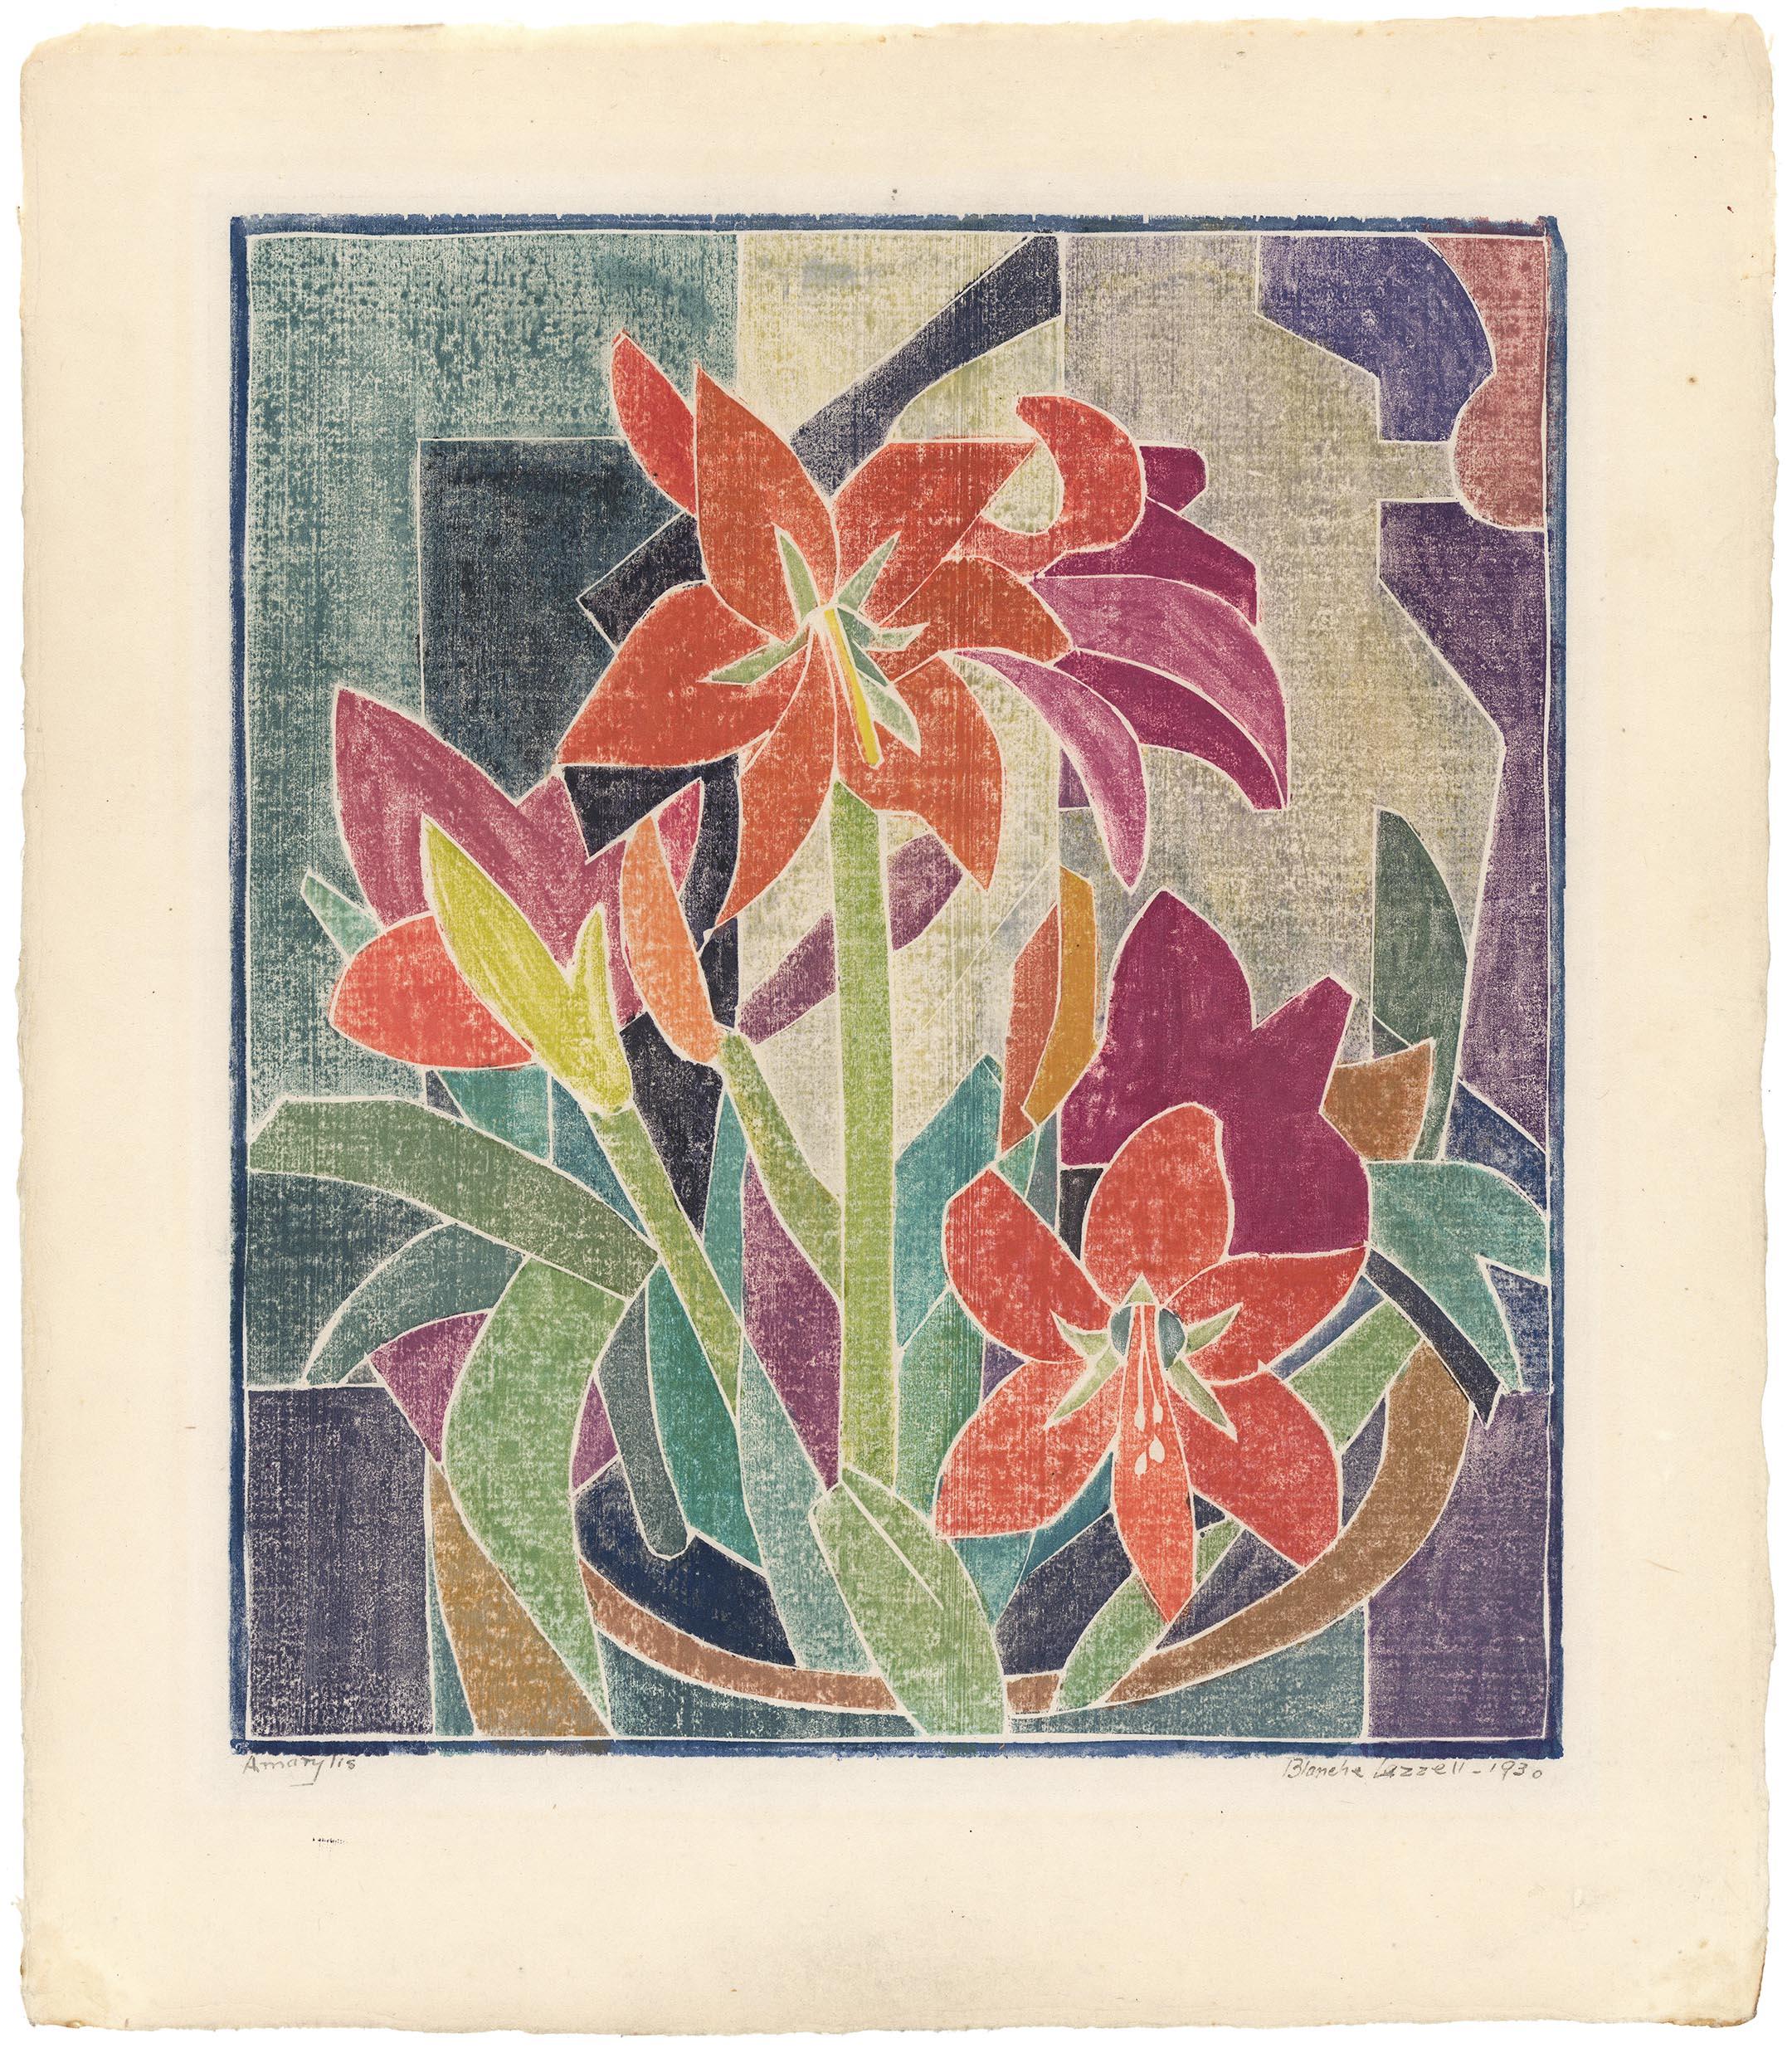 Amarylis [sic]. (Amaryllis). - Print by Blanche Lazzell